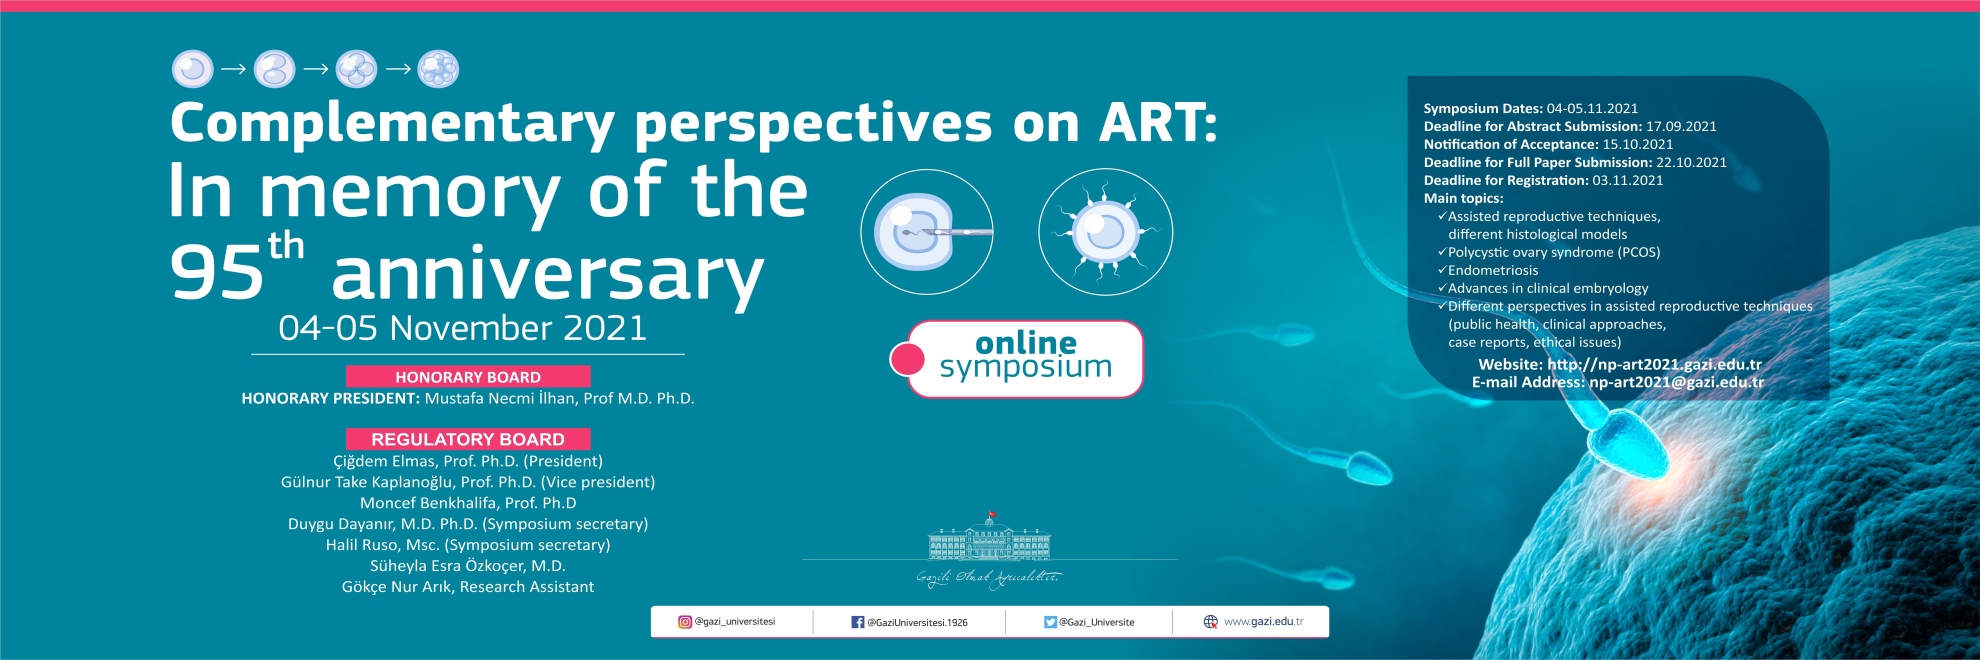 Complementary perspectives on ART: In memory of the 95th anniversary